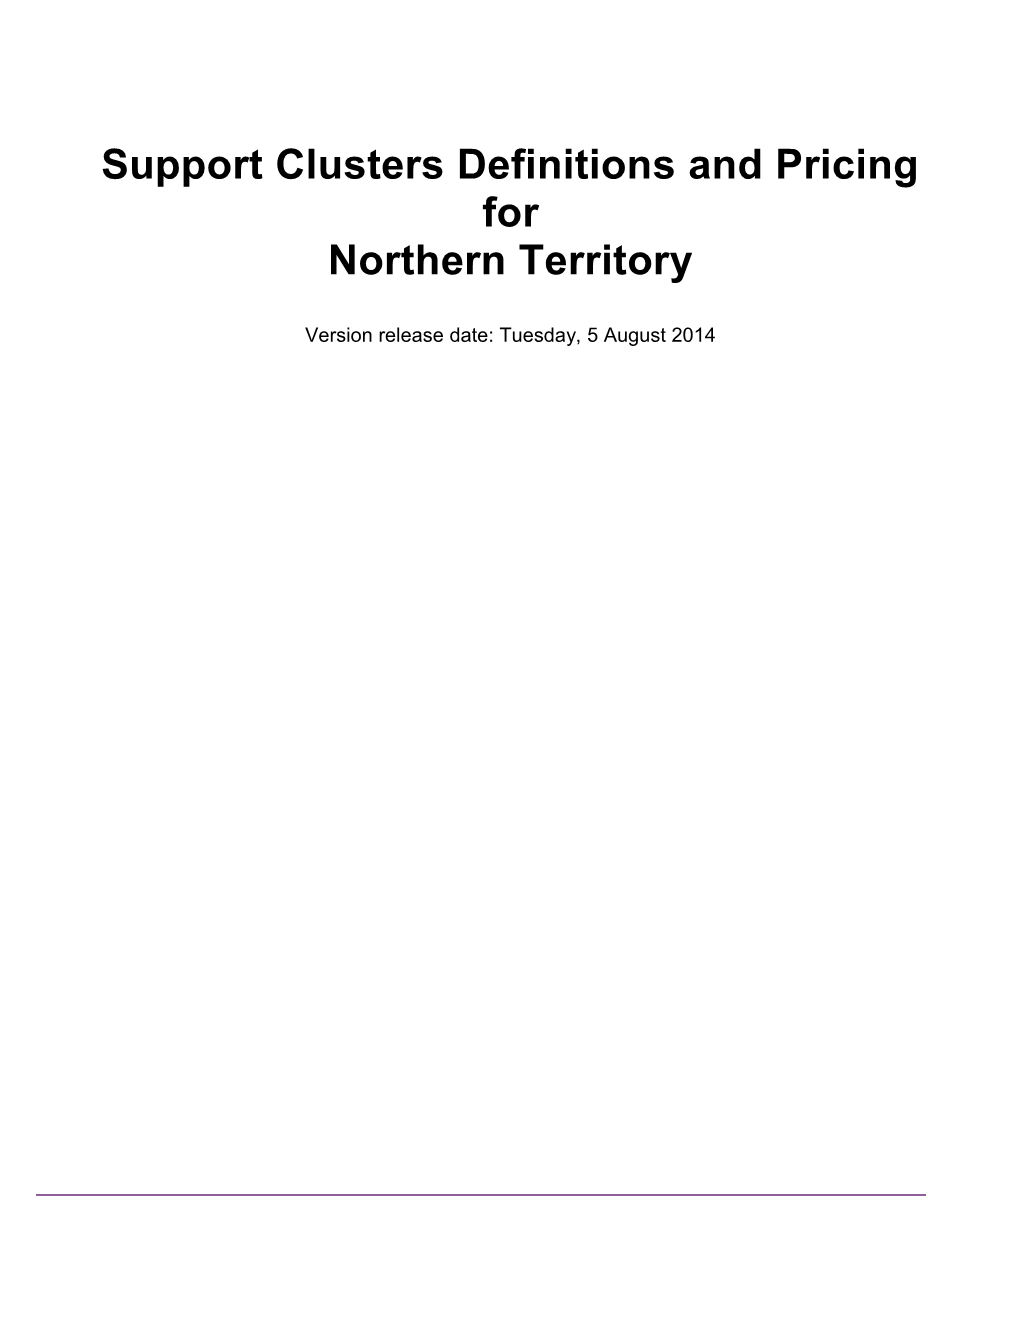 Support Clusters Definitions and Pricing for Northern Territory